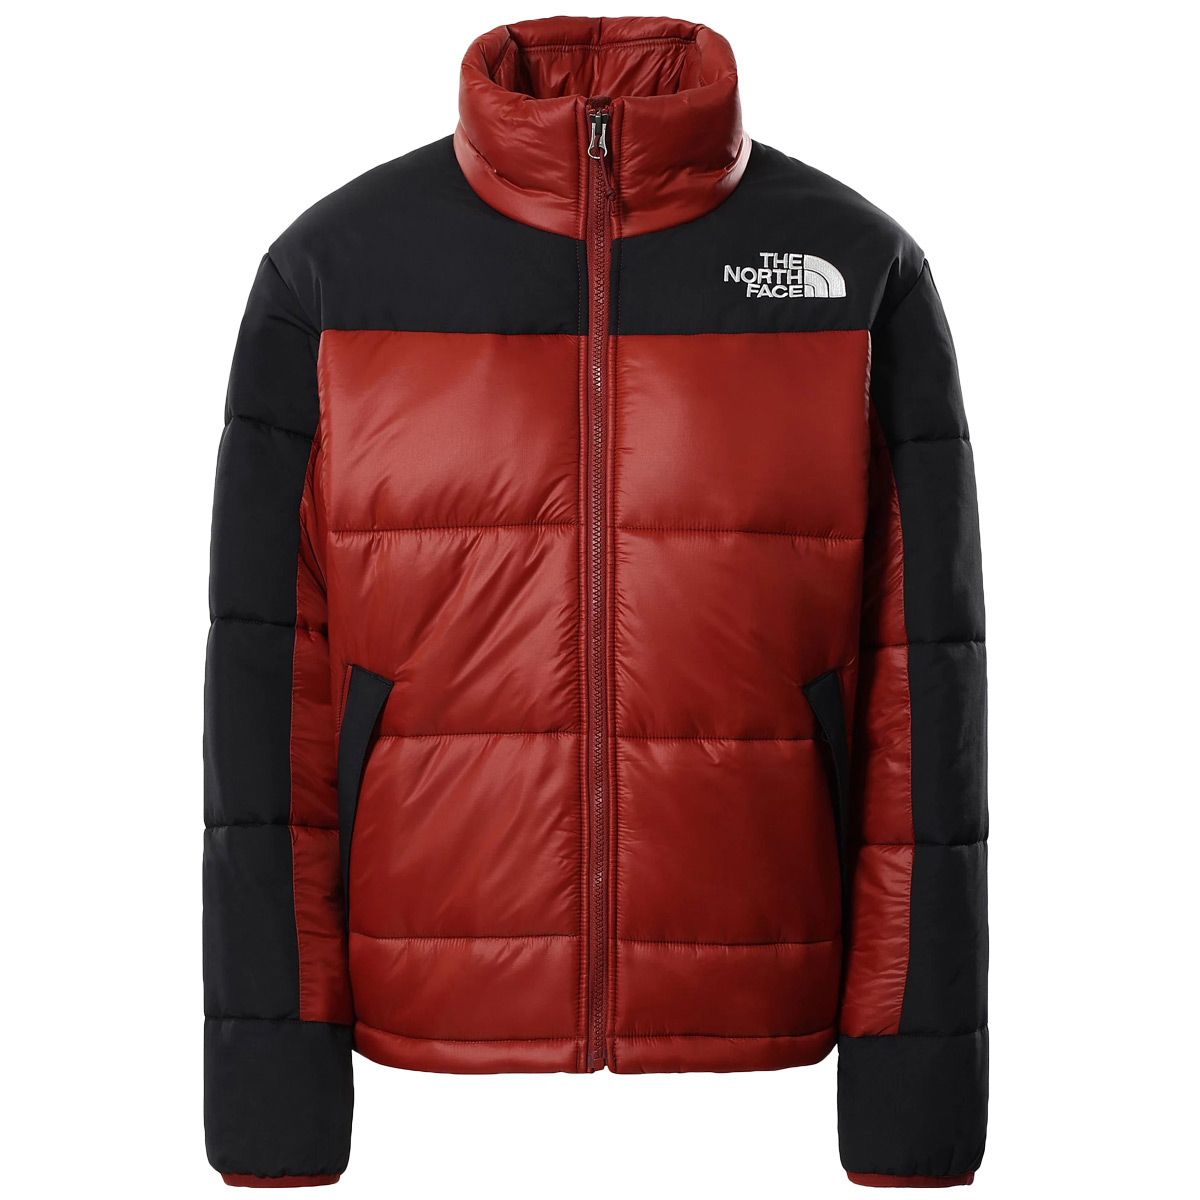 The North Face "Himalayan Insulated Jacket Wn's"